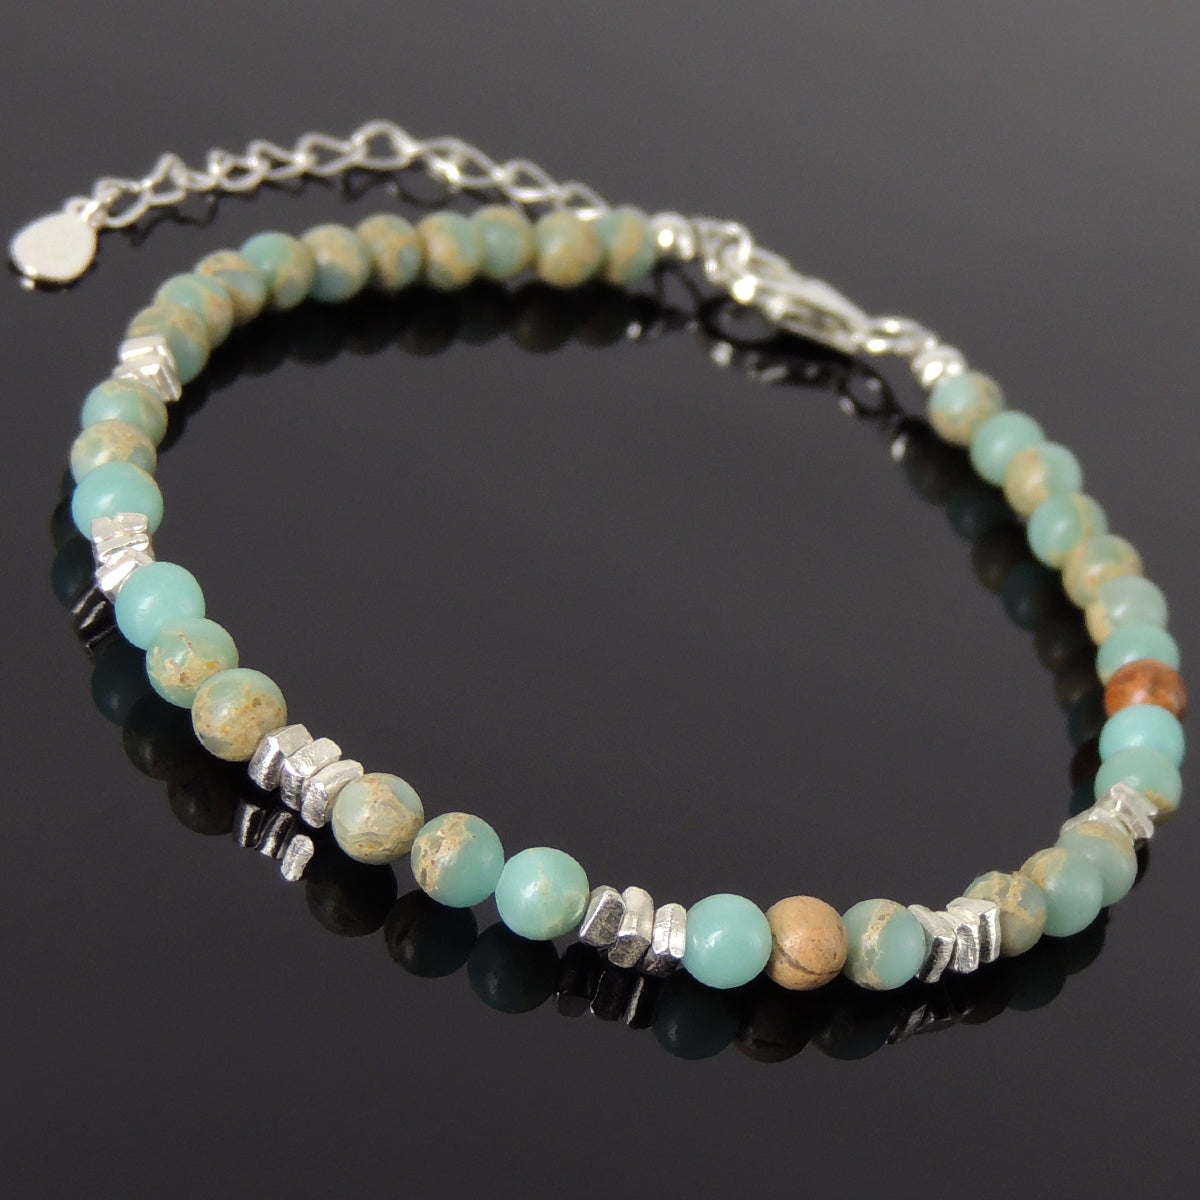 4mm Jasper Healing Stone Bracelet with S925 Sterling Silver Nugget Beads, Chain, & Clasp - Handmade by Gem & Silver BR1267